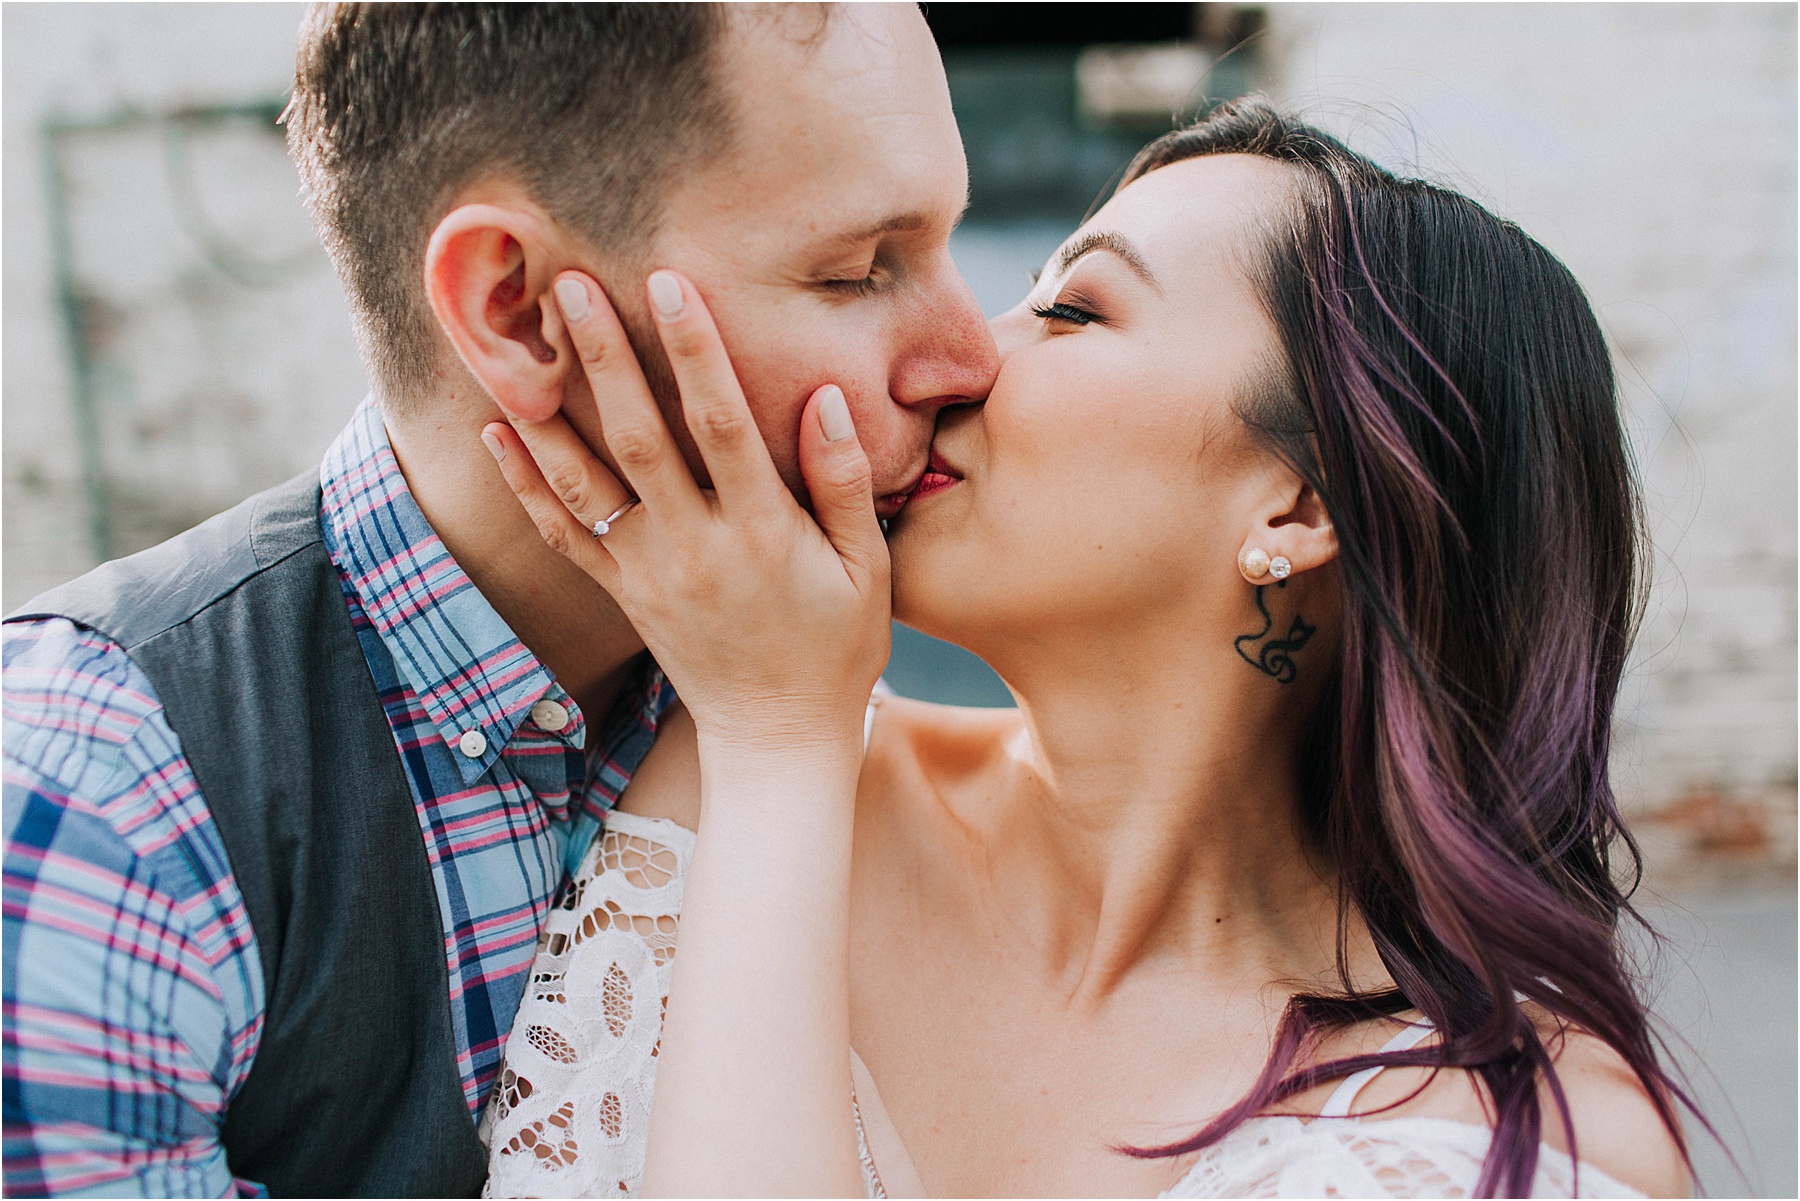 Candid Engagement Photography in Old Town Pasadena